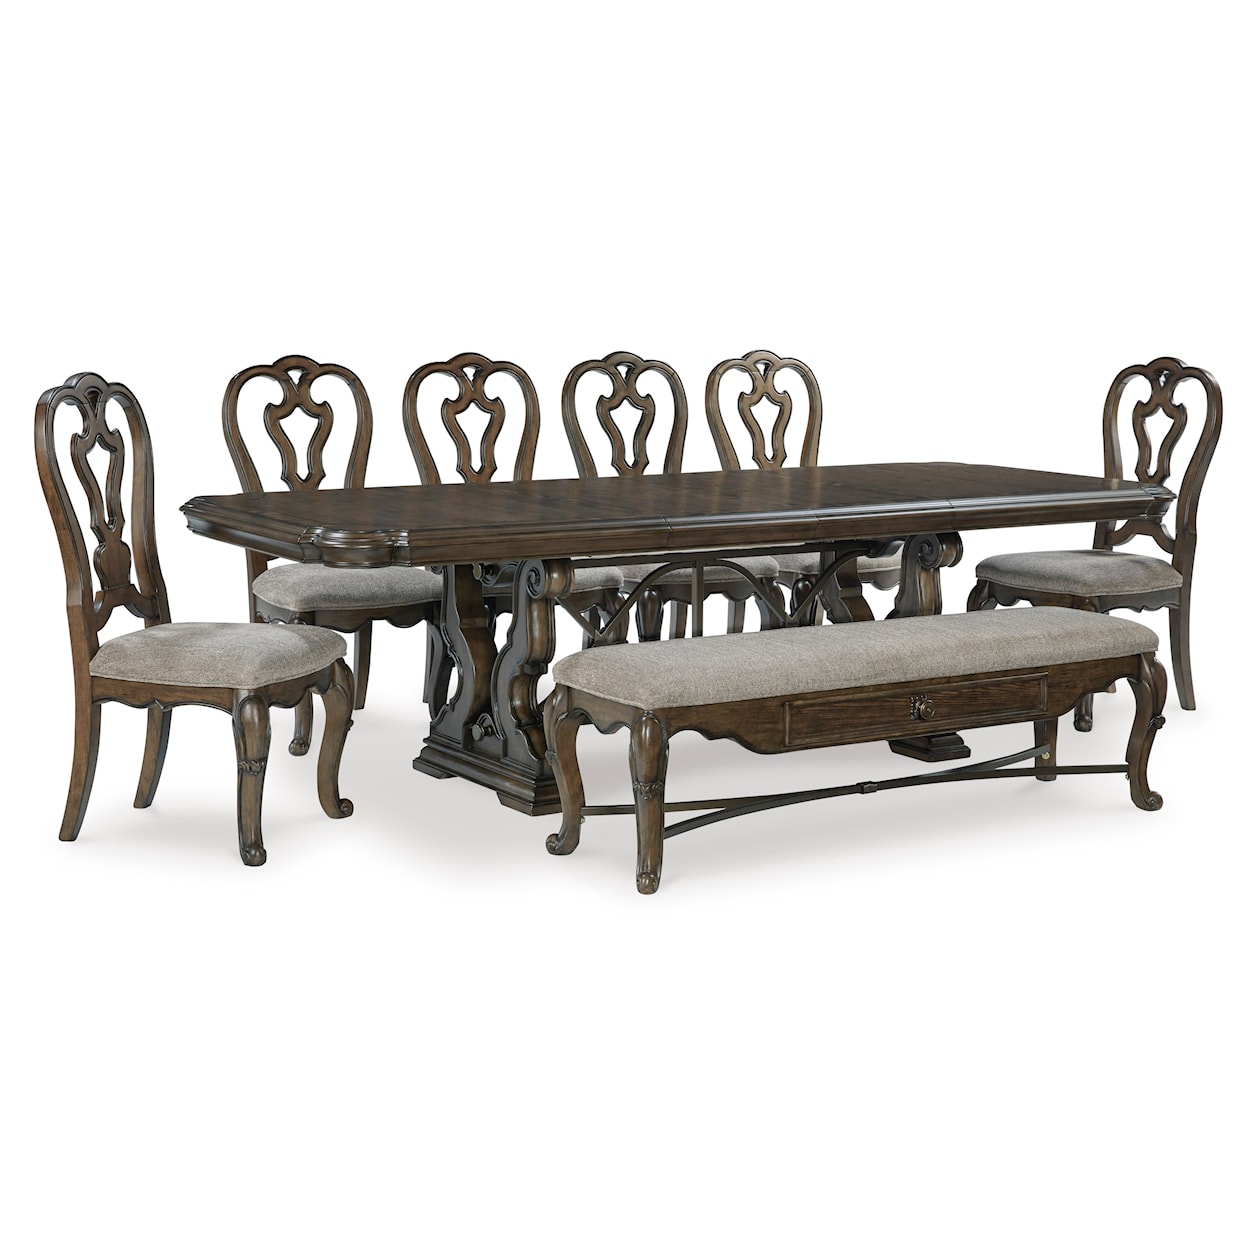 Signature Maylee 8-Piece Dining Set with Bench